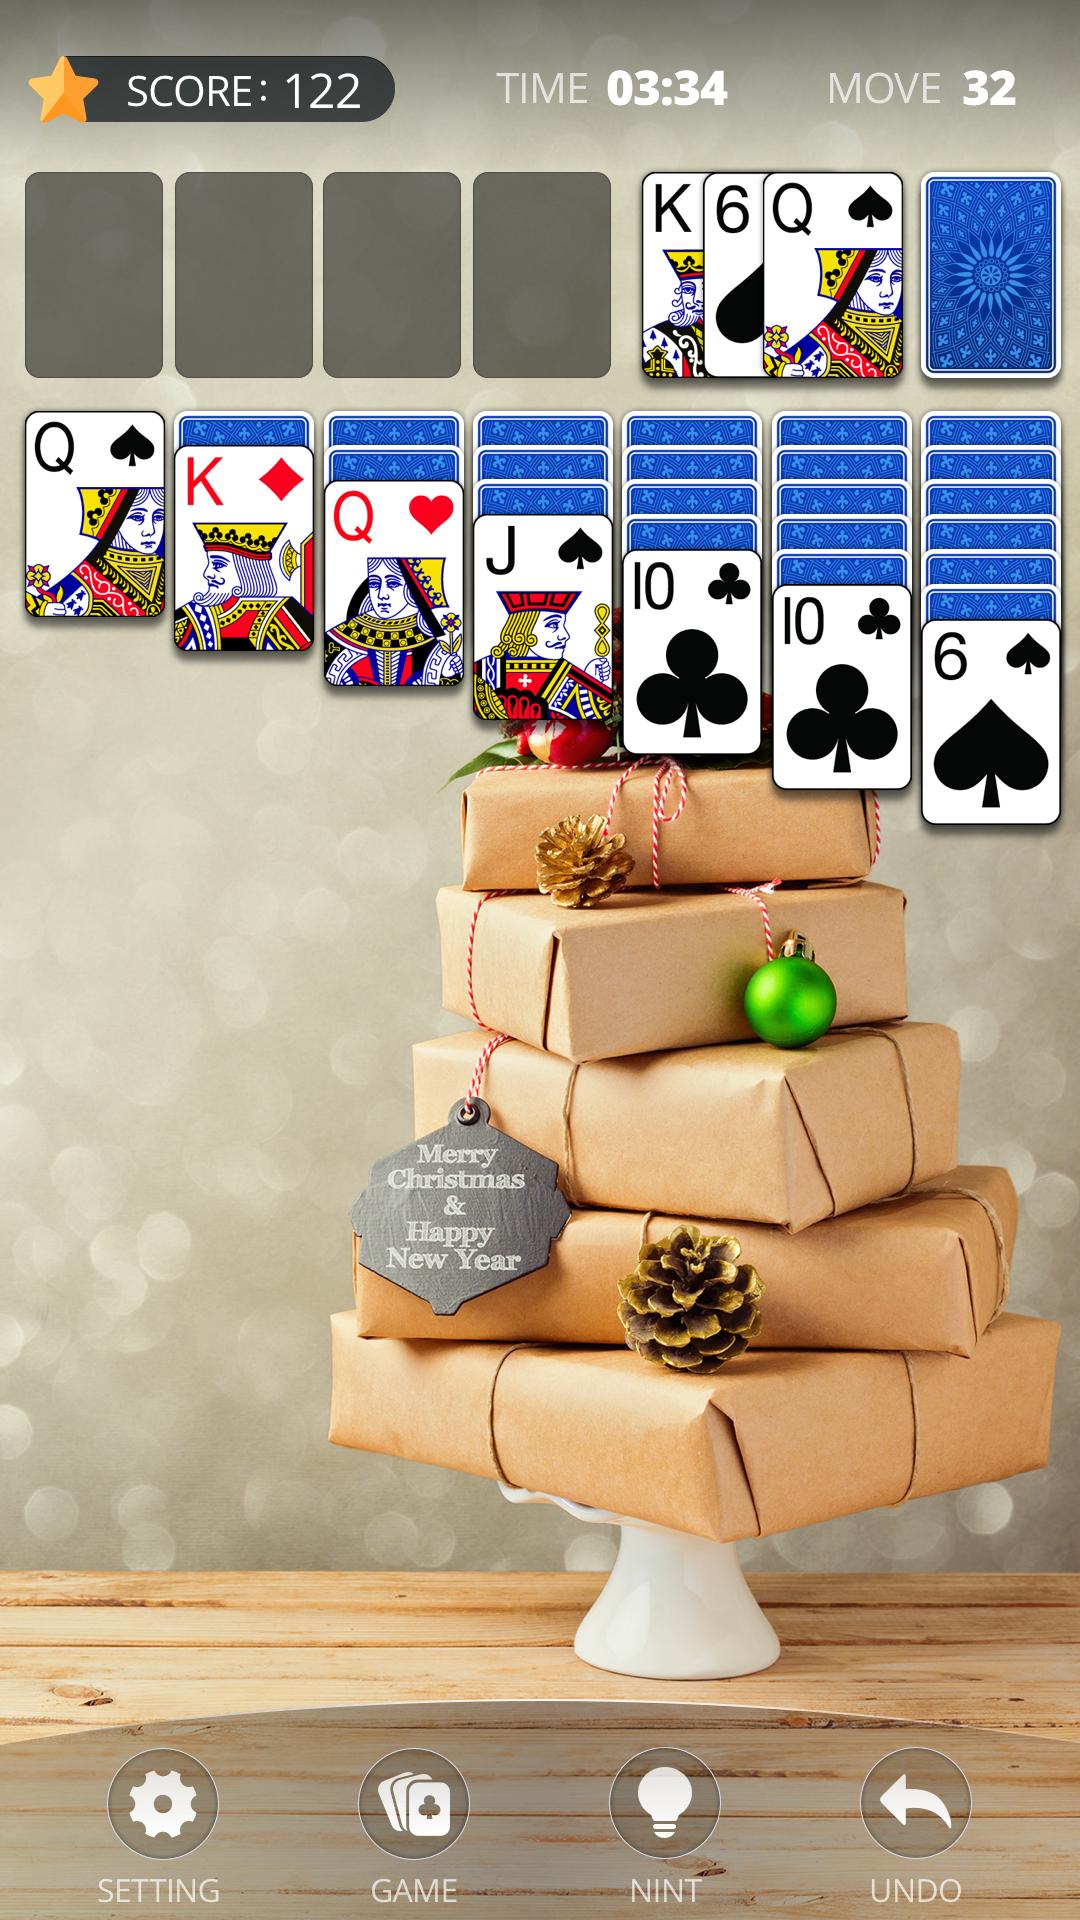 Solitaire by Cardscapes 1.8.4 Screenshot 3